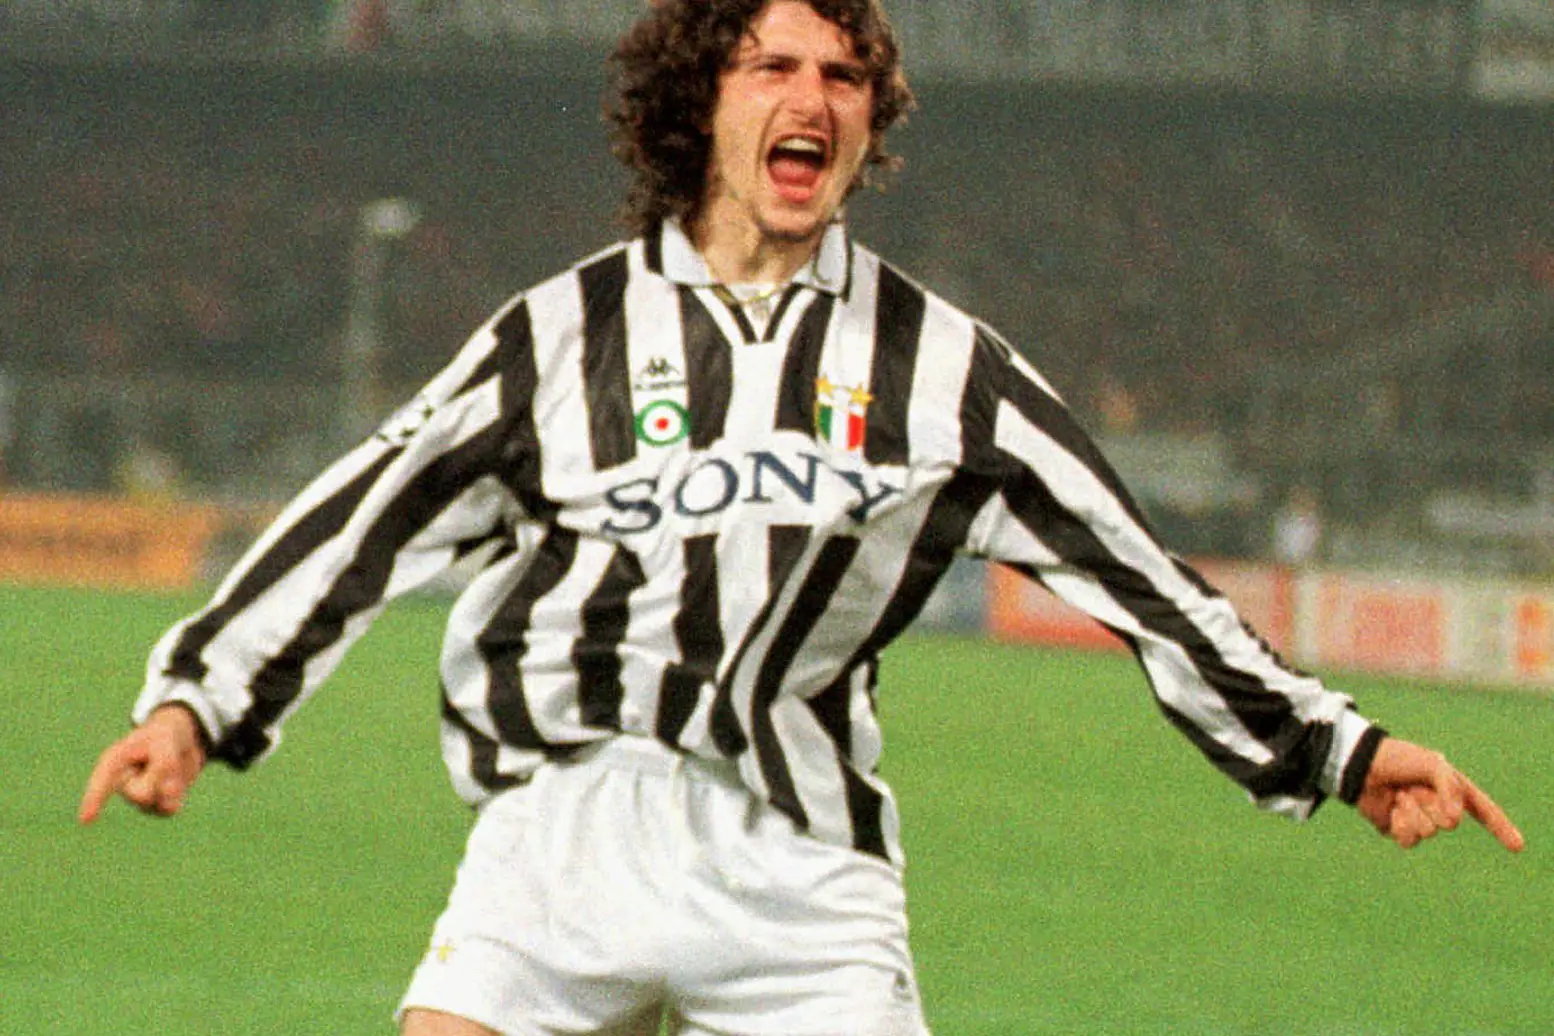 ** FILE ** Juventus Michele Padovano shouts his joy after scoring during the second-leg, quarterfinal match of the Champions League, Juventus vs Real Madrid, at Turin's Delle Alpi stadium, in this file photo taken on March 20, 1996. Padovano was reportedly among 32 people arrested by the Carabinieri of Turin investigating an international drug ring. (AP Photo/Mauro Pilone)